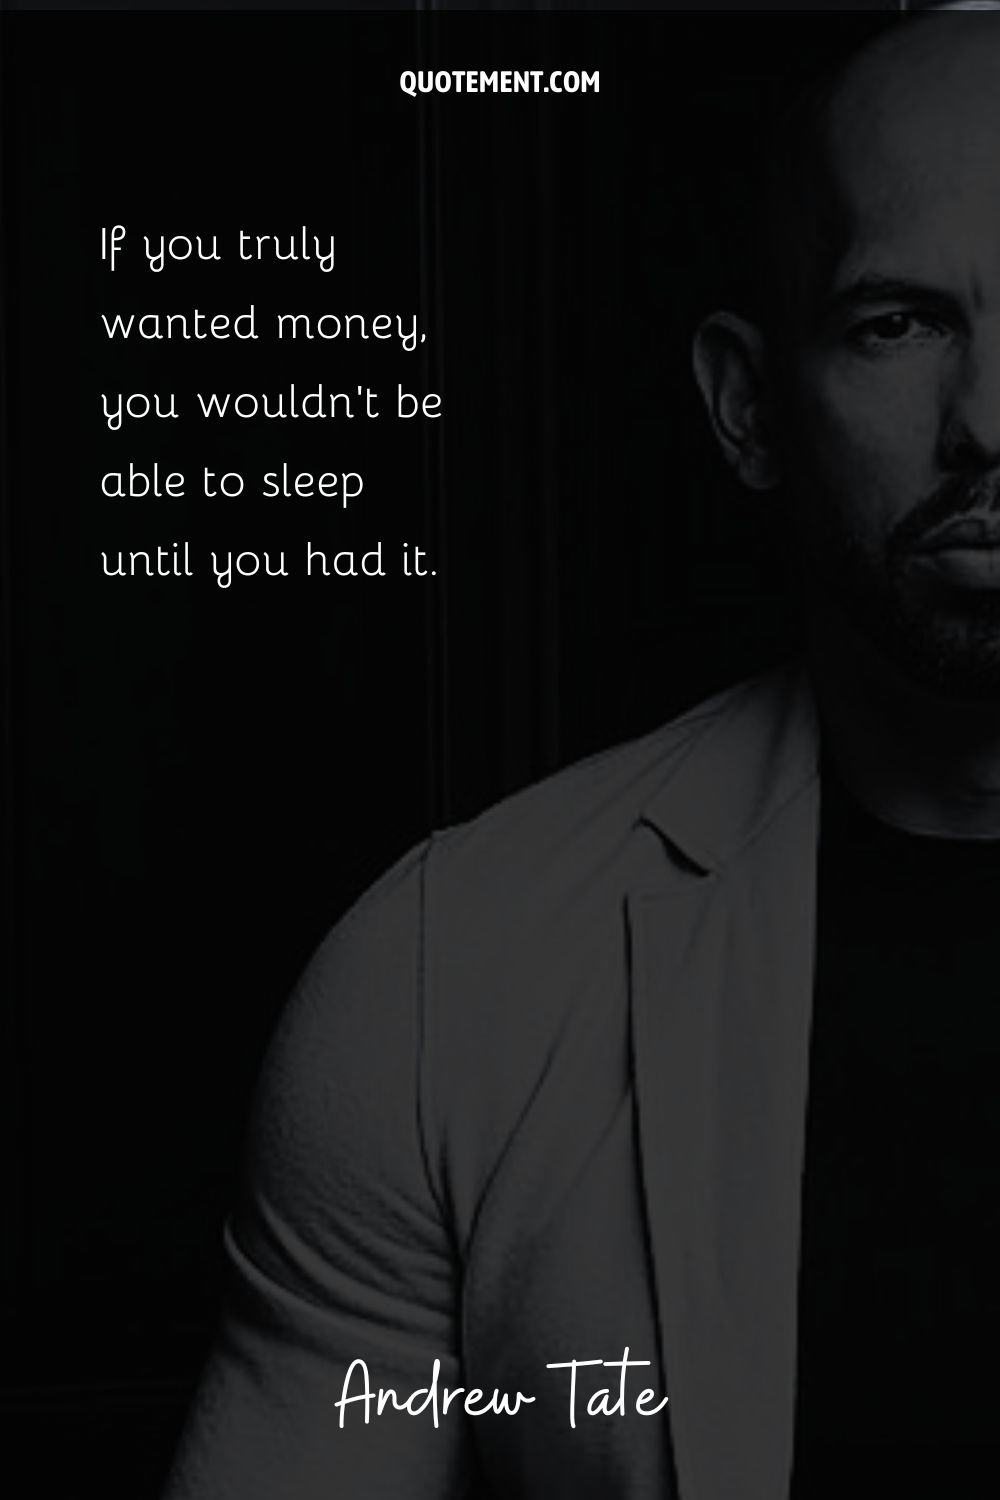 If you truly wanted money, you wouldn’t be able to sleep until you had it